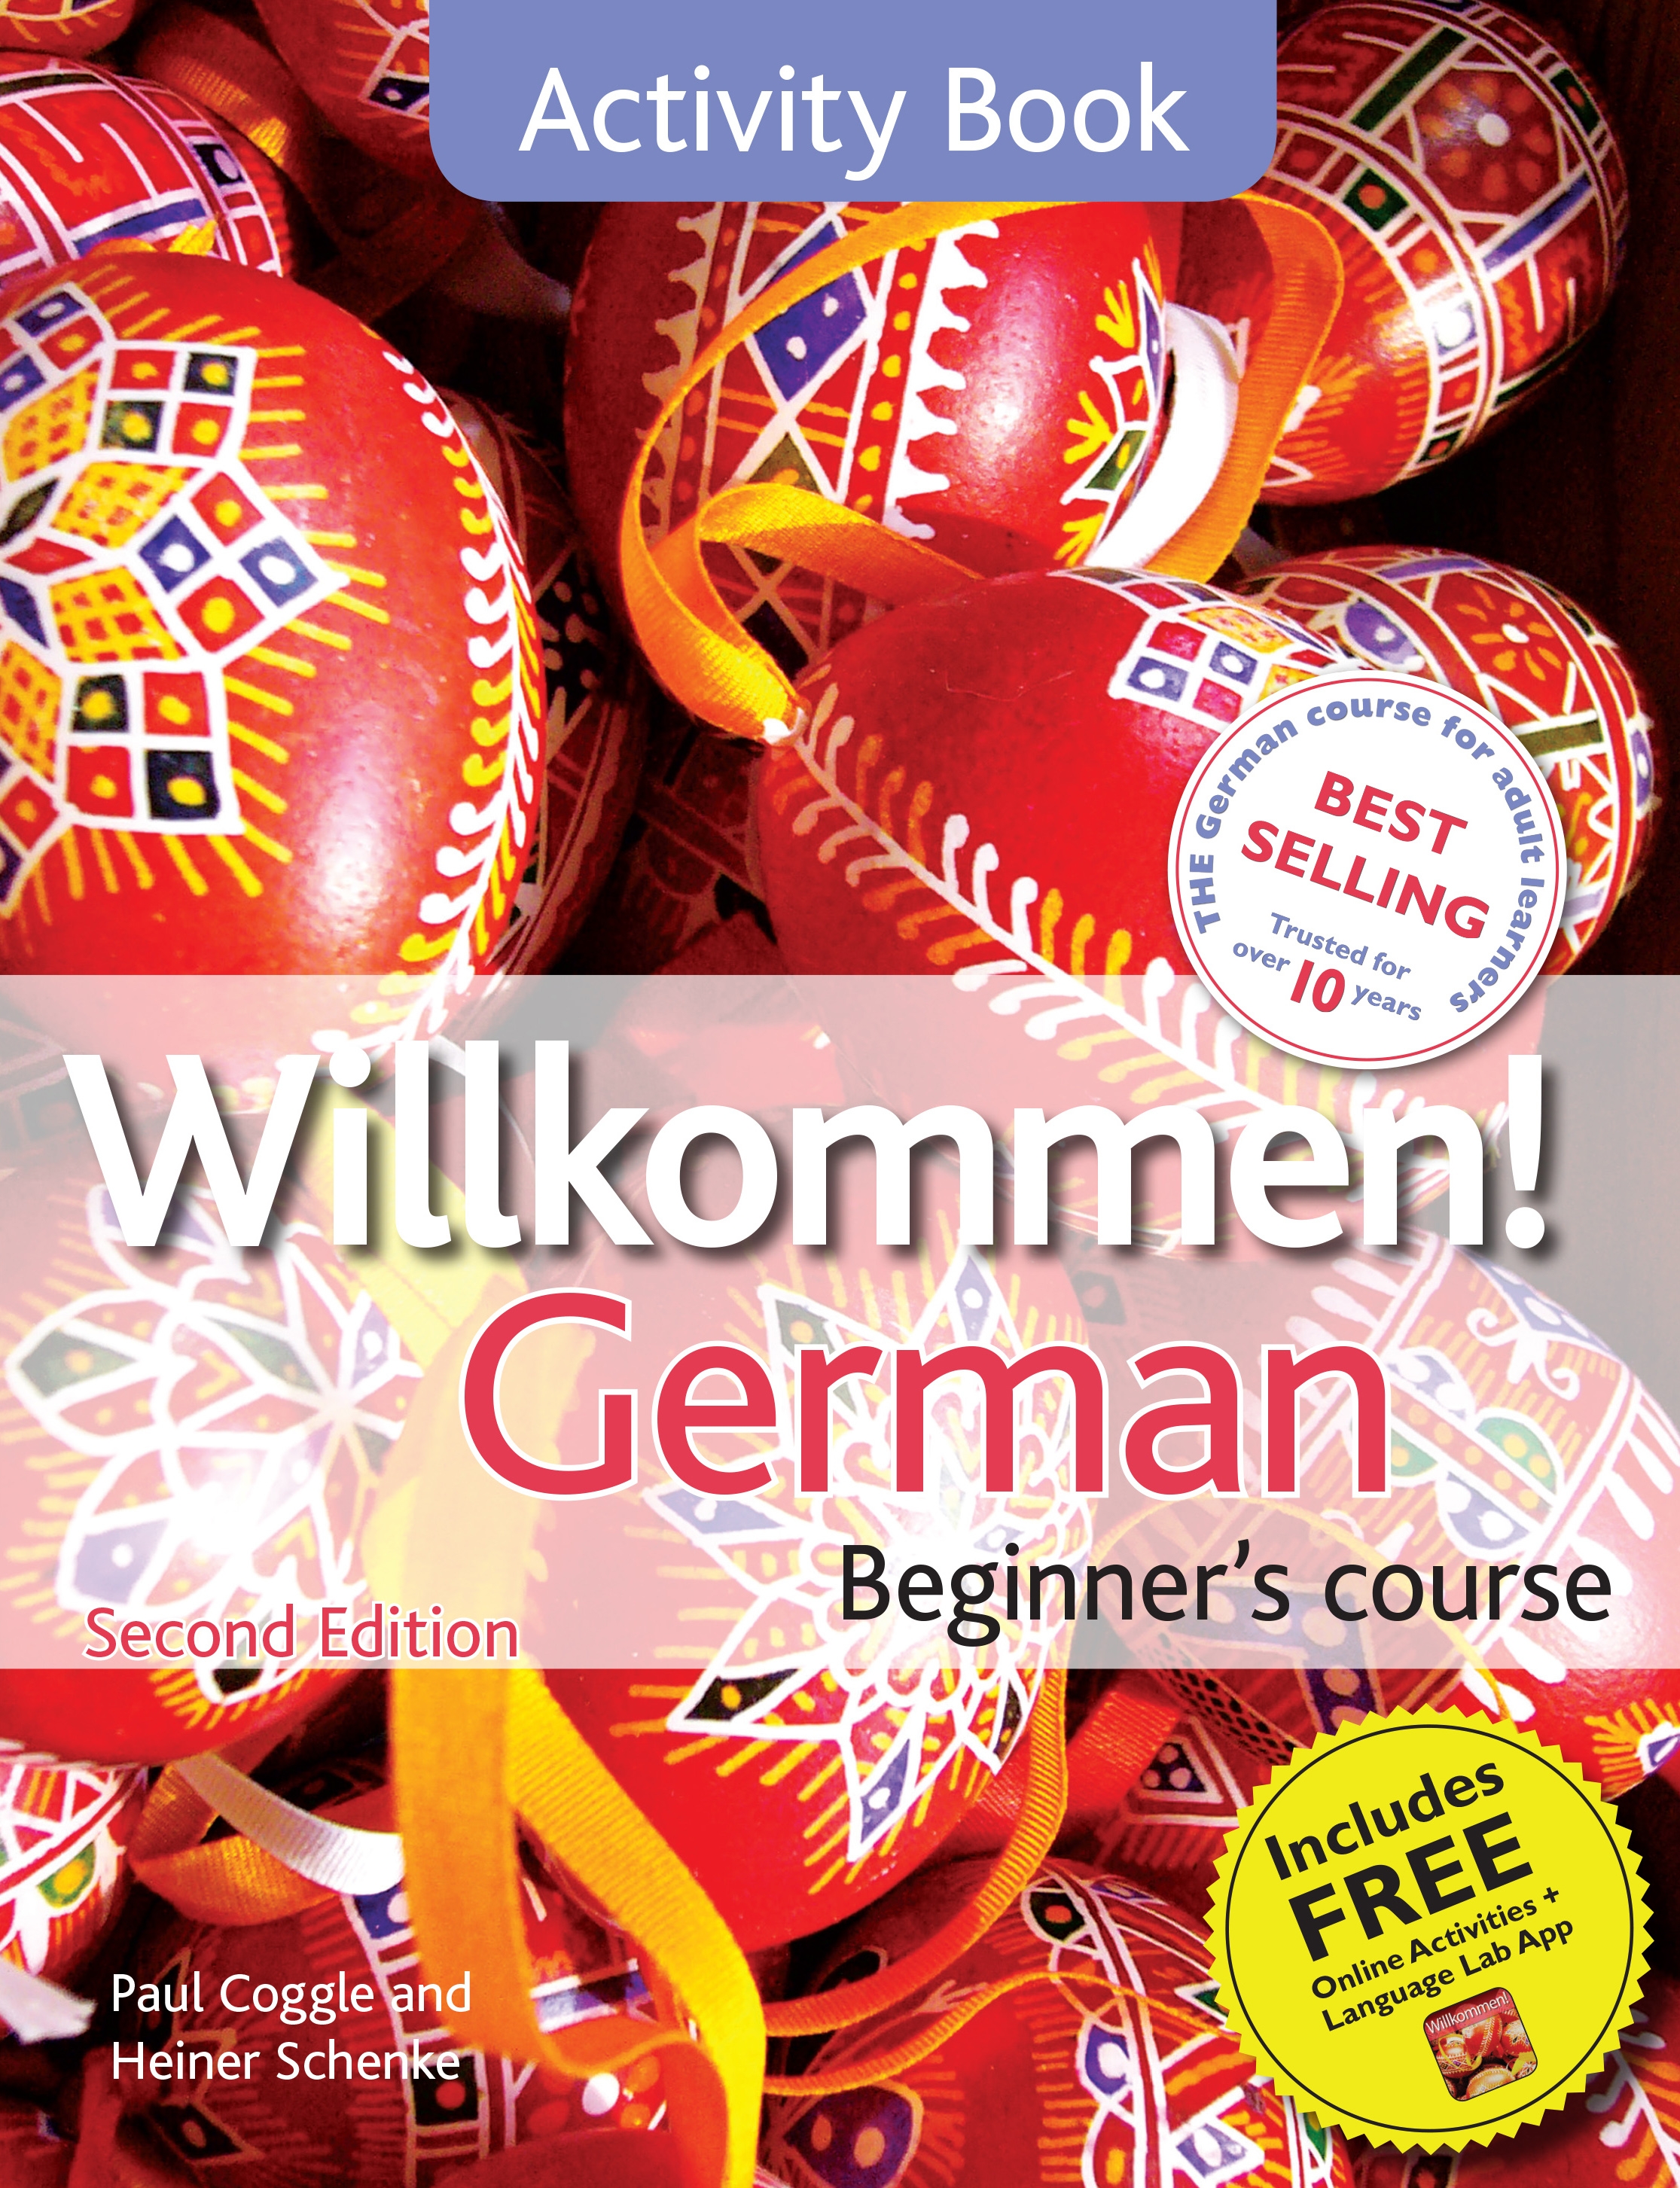 Willkommen! German Beginner's Course 2ED Revised by Paul Coggle